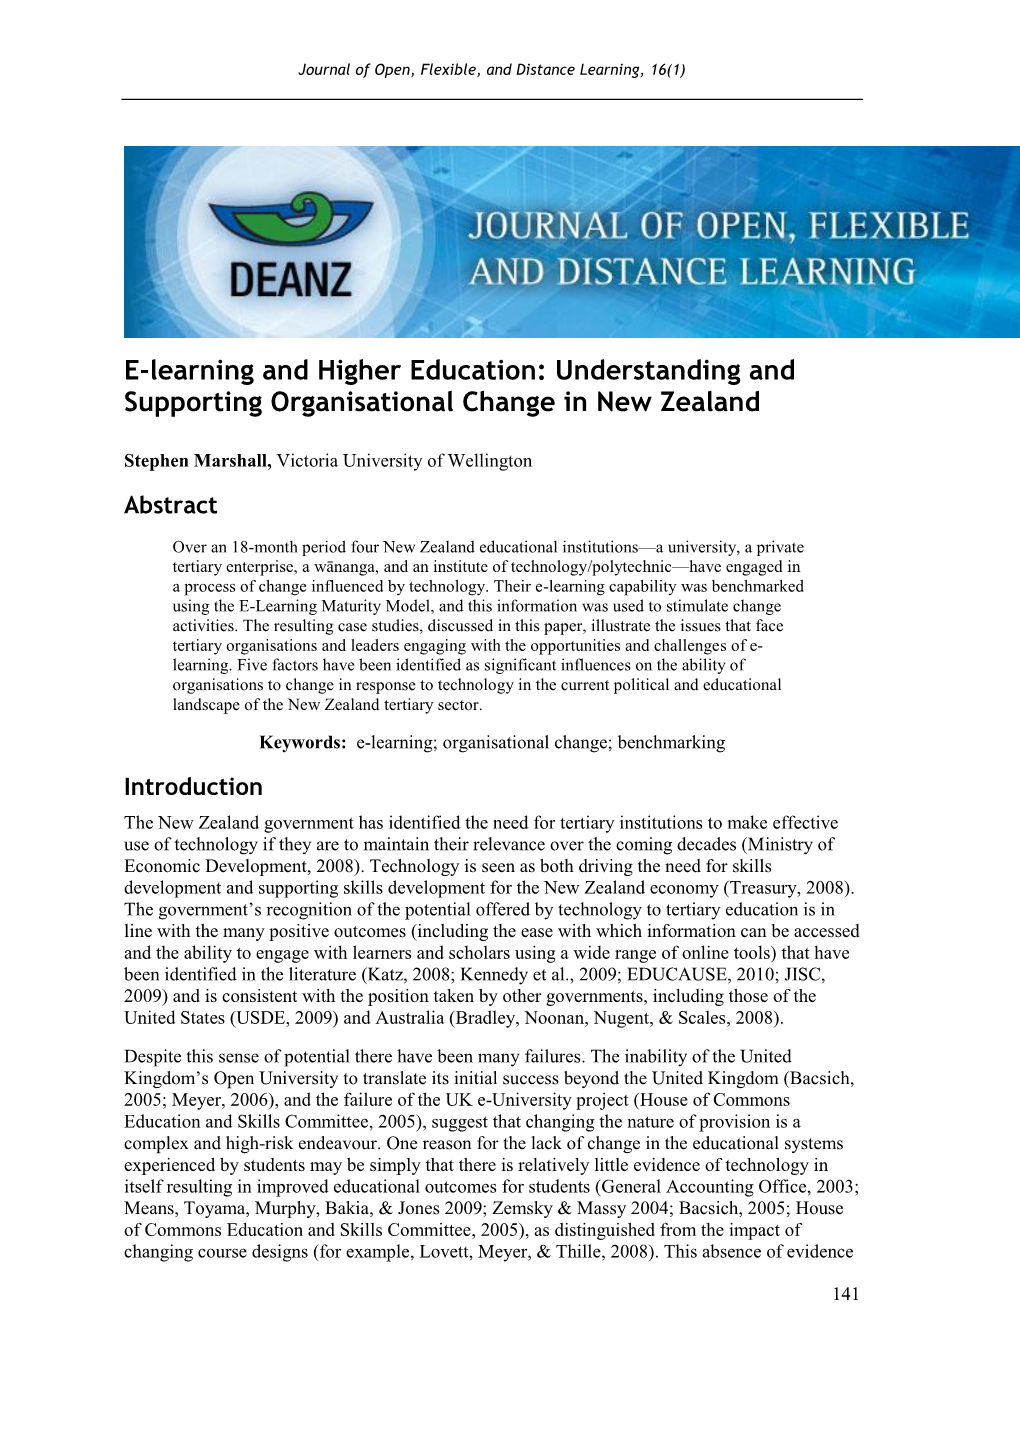 E-Learning and Higher Education: Understanding and Supporting Organisational Change in New Zealand